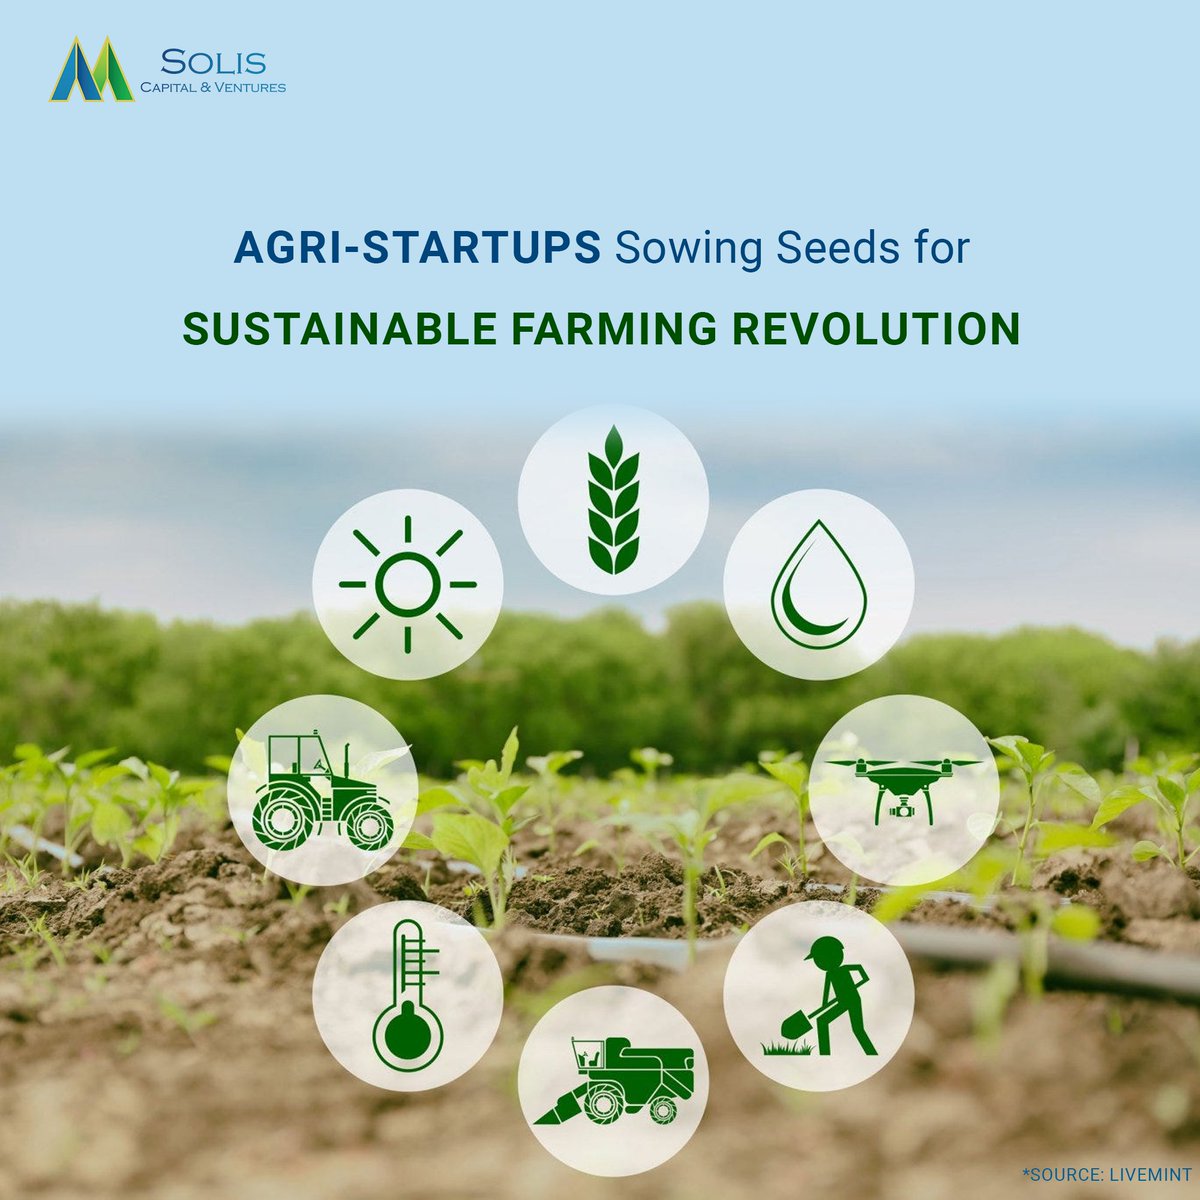 #India's #agristartups are revolutionizing #agriculture with #advancedtechnology and sustainable practices. The #government's support and favourable #business #climate have led to significant #startupgrowth, with a rise in budget allocation for agriculture.
#SolisCapitalVentures